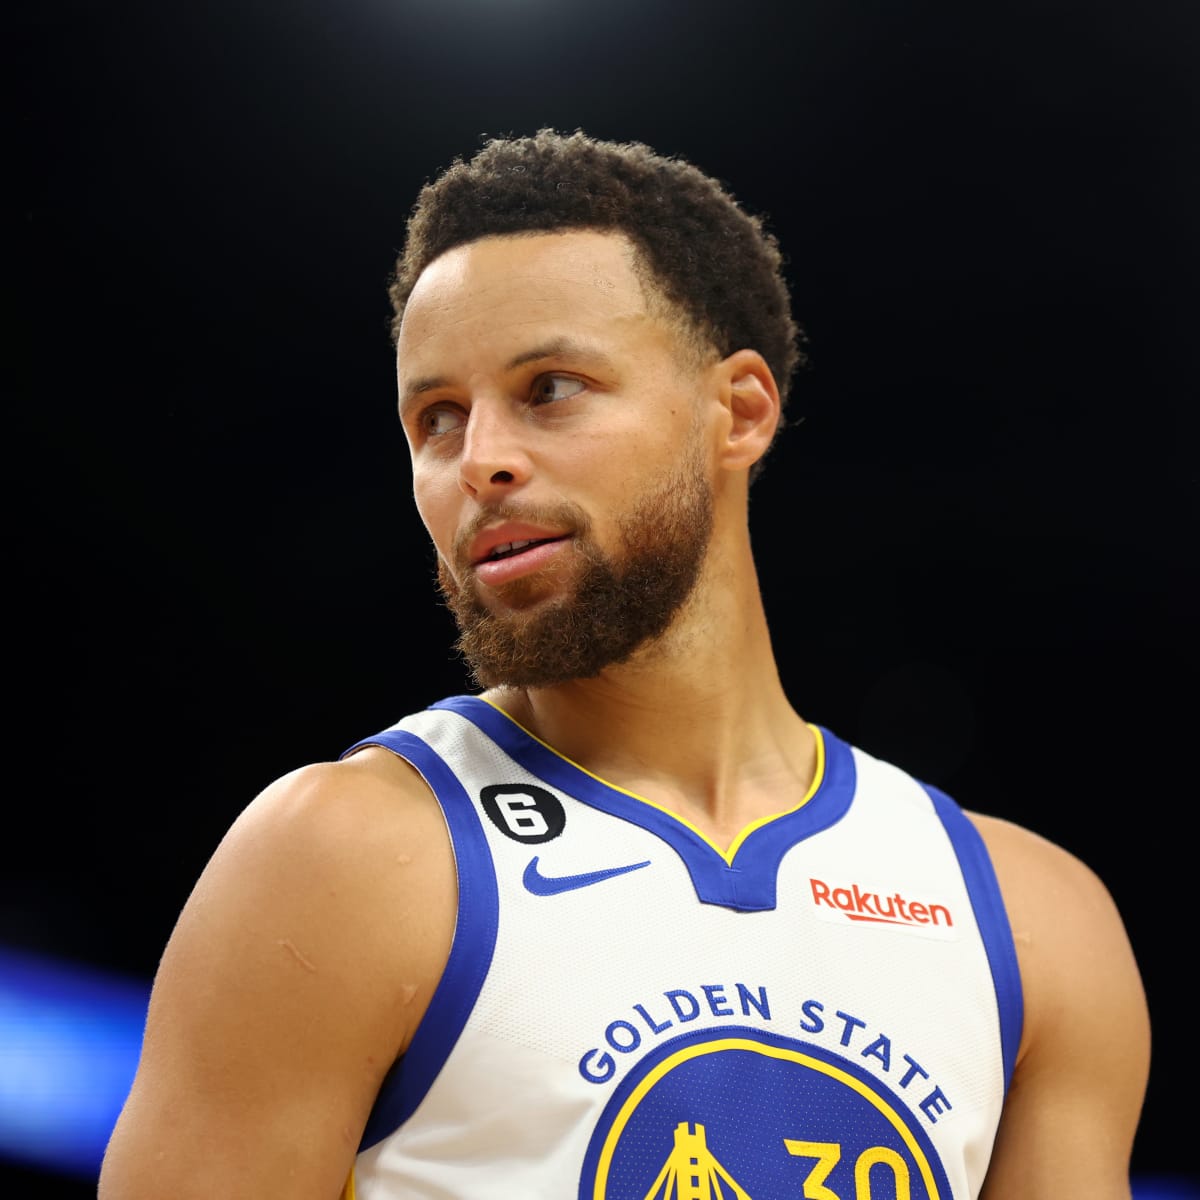 Stephen Curry Warriors 22/23 City edition jersey review in 2023